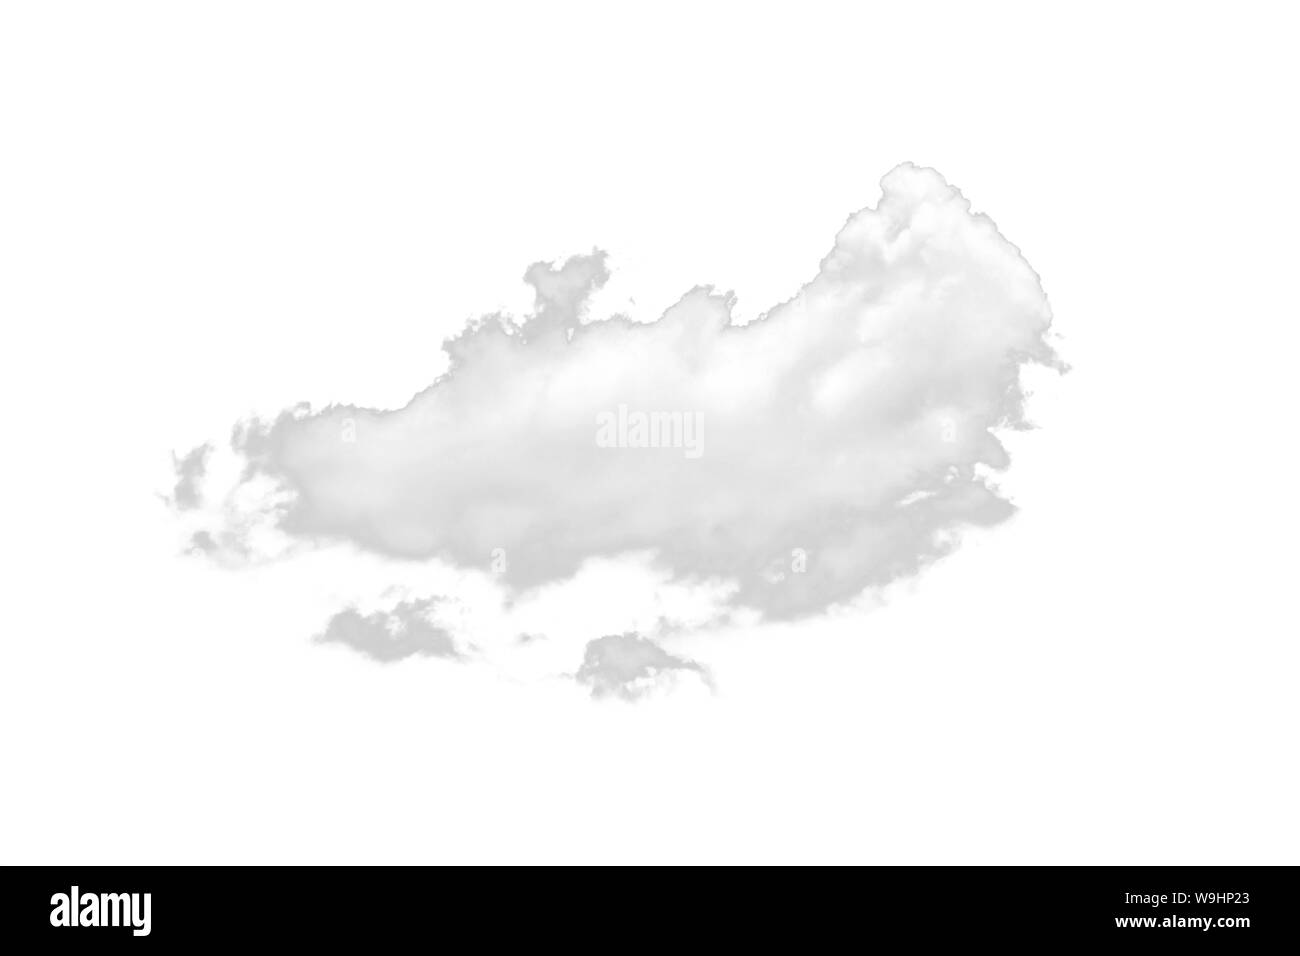 Nature single white cloud isolated on white background. Cutout clouds element design for multi purpose use. Stock Photo